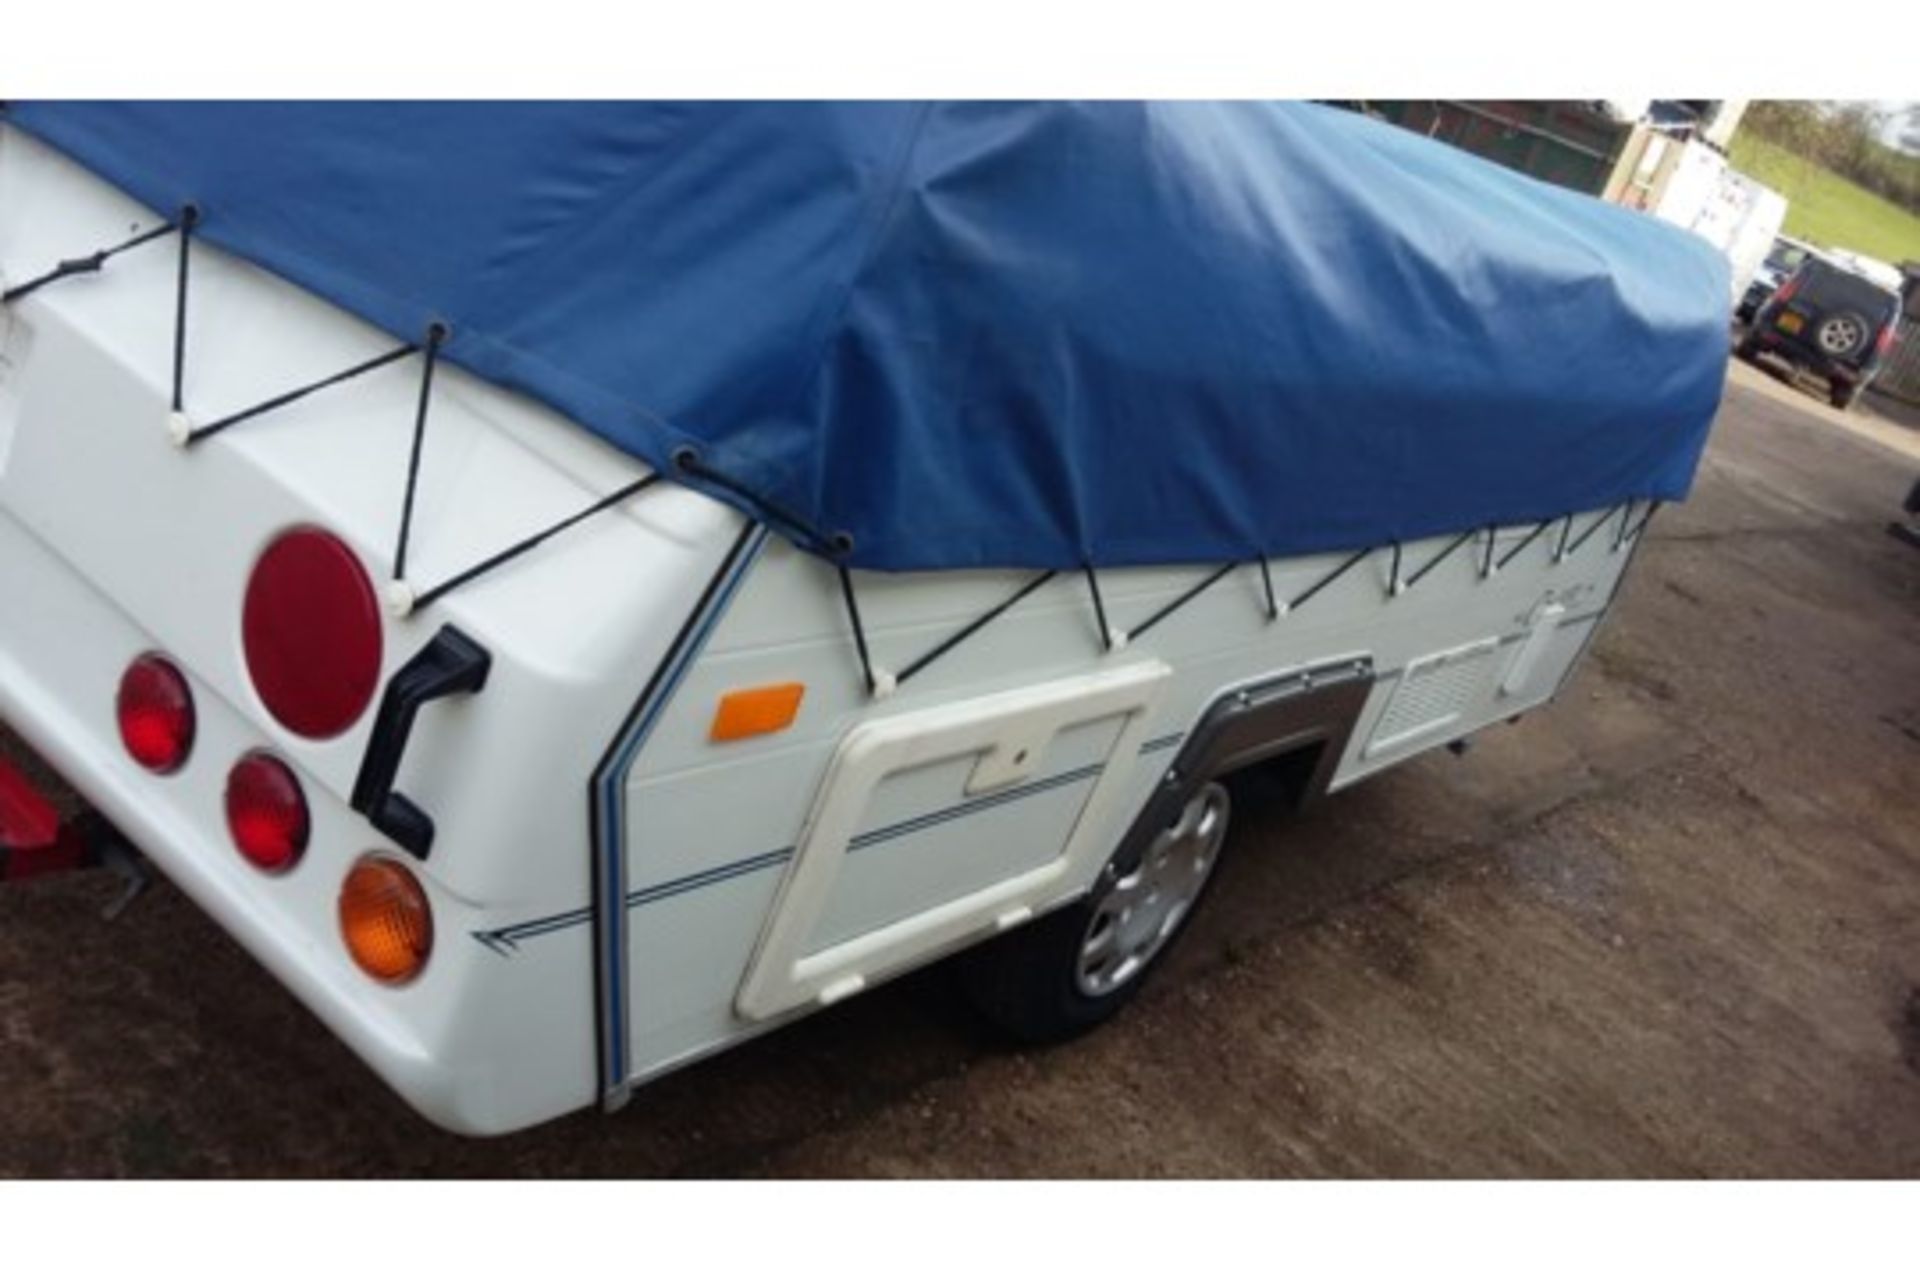 2004 CONWAY CRUISER 4 BERTH FOLDING CAMPER TRAILER TENT SINGLE AXLE TOW-ABLE *NO VAT* - Image 5 of 18